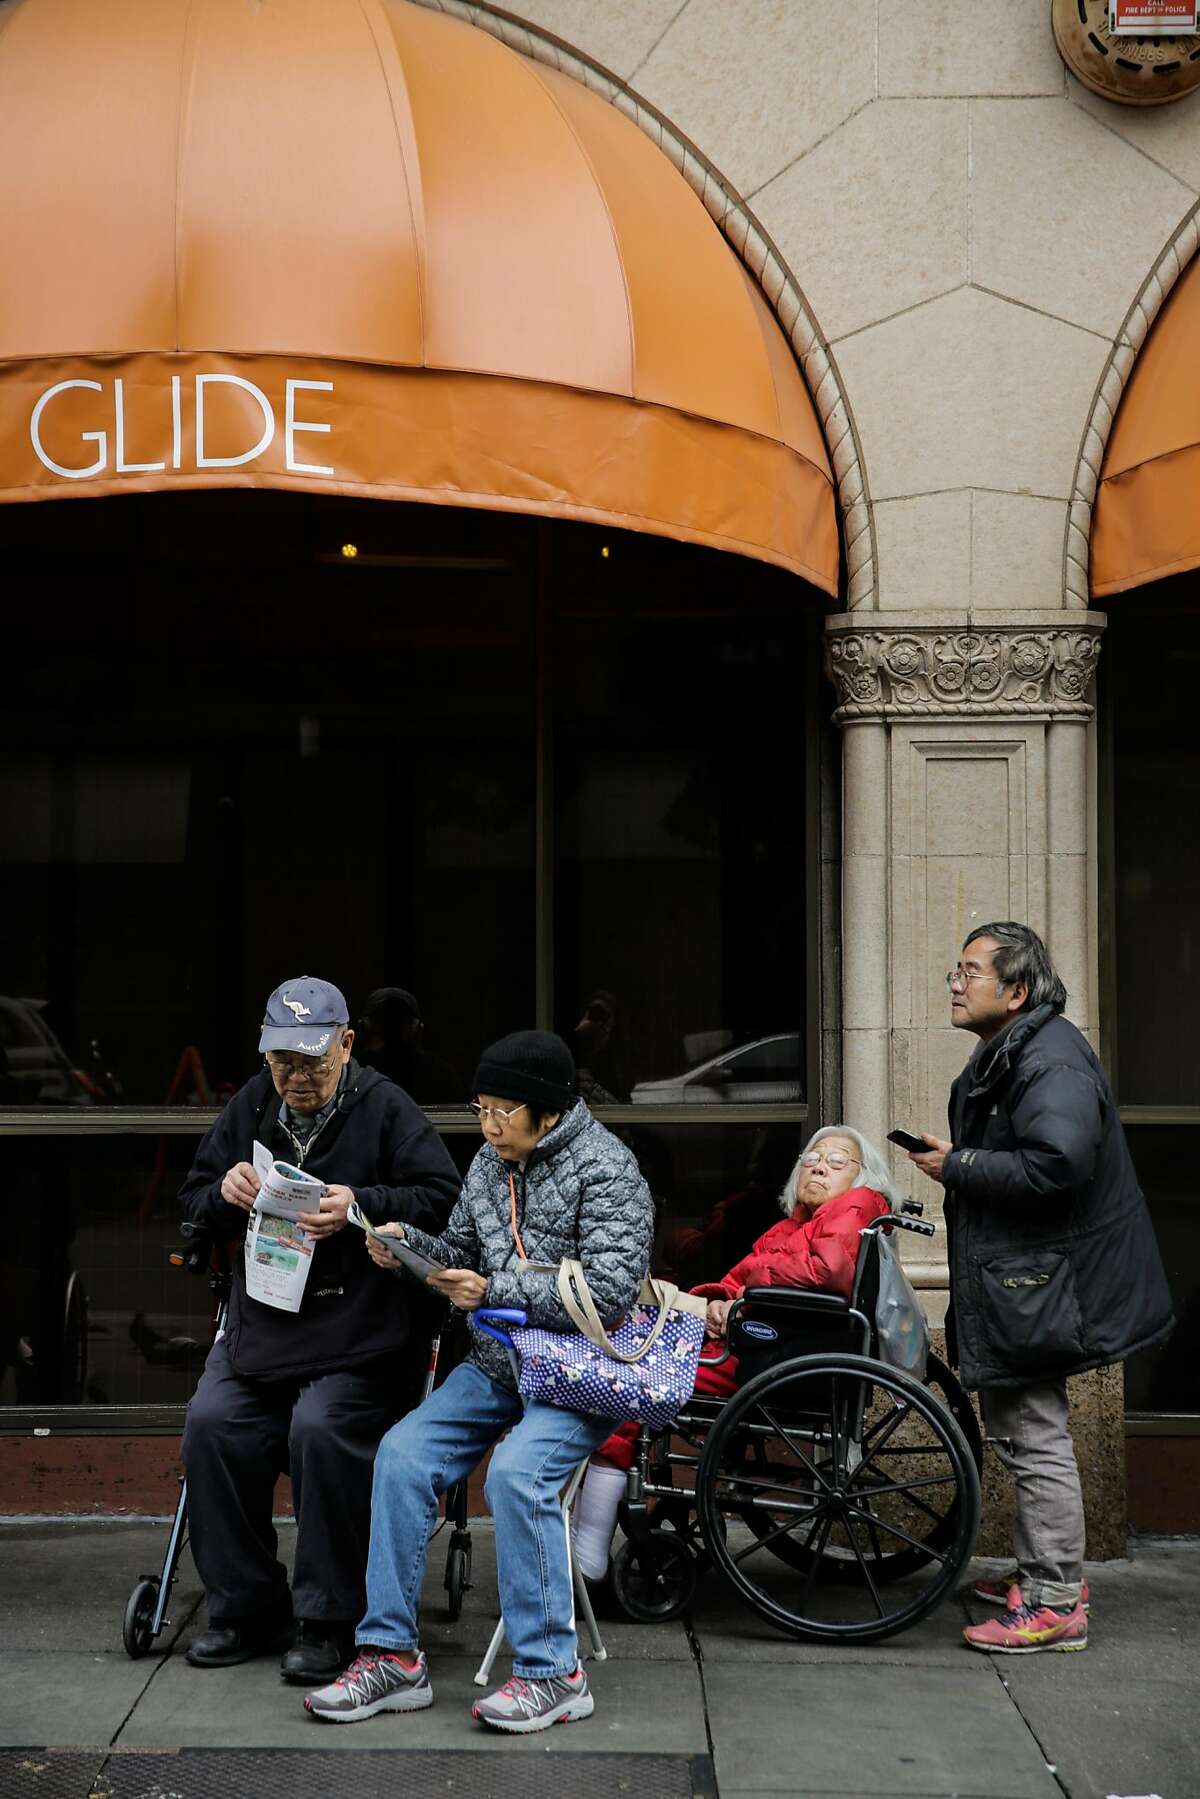 People wait outside Glide Memorial Church ahead of a free Christmas Eve lunch hosted by House of Prime Rib in San Francisco, Calif., on Sunday, Dec. 24, 2017.